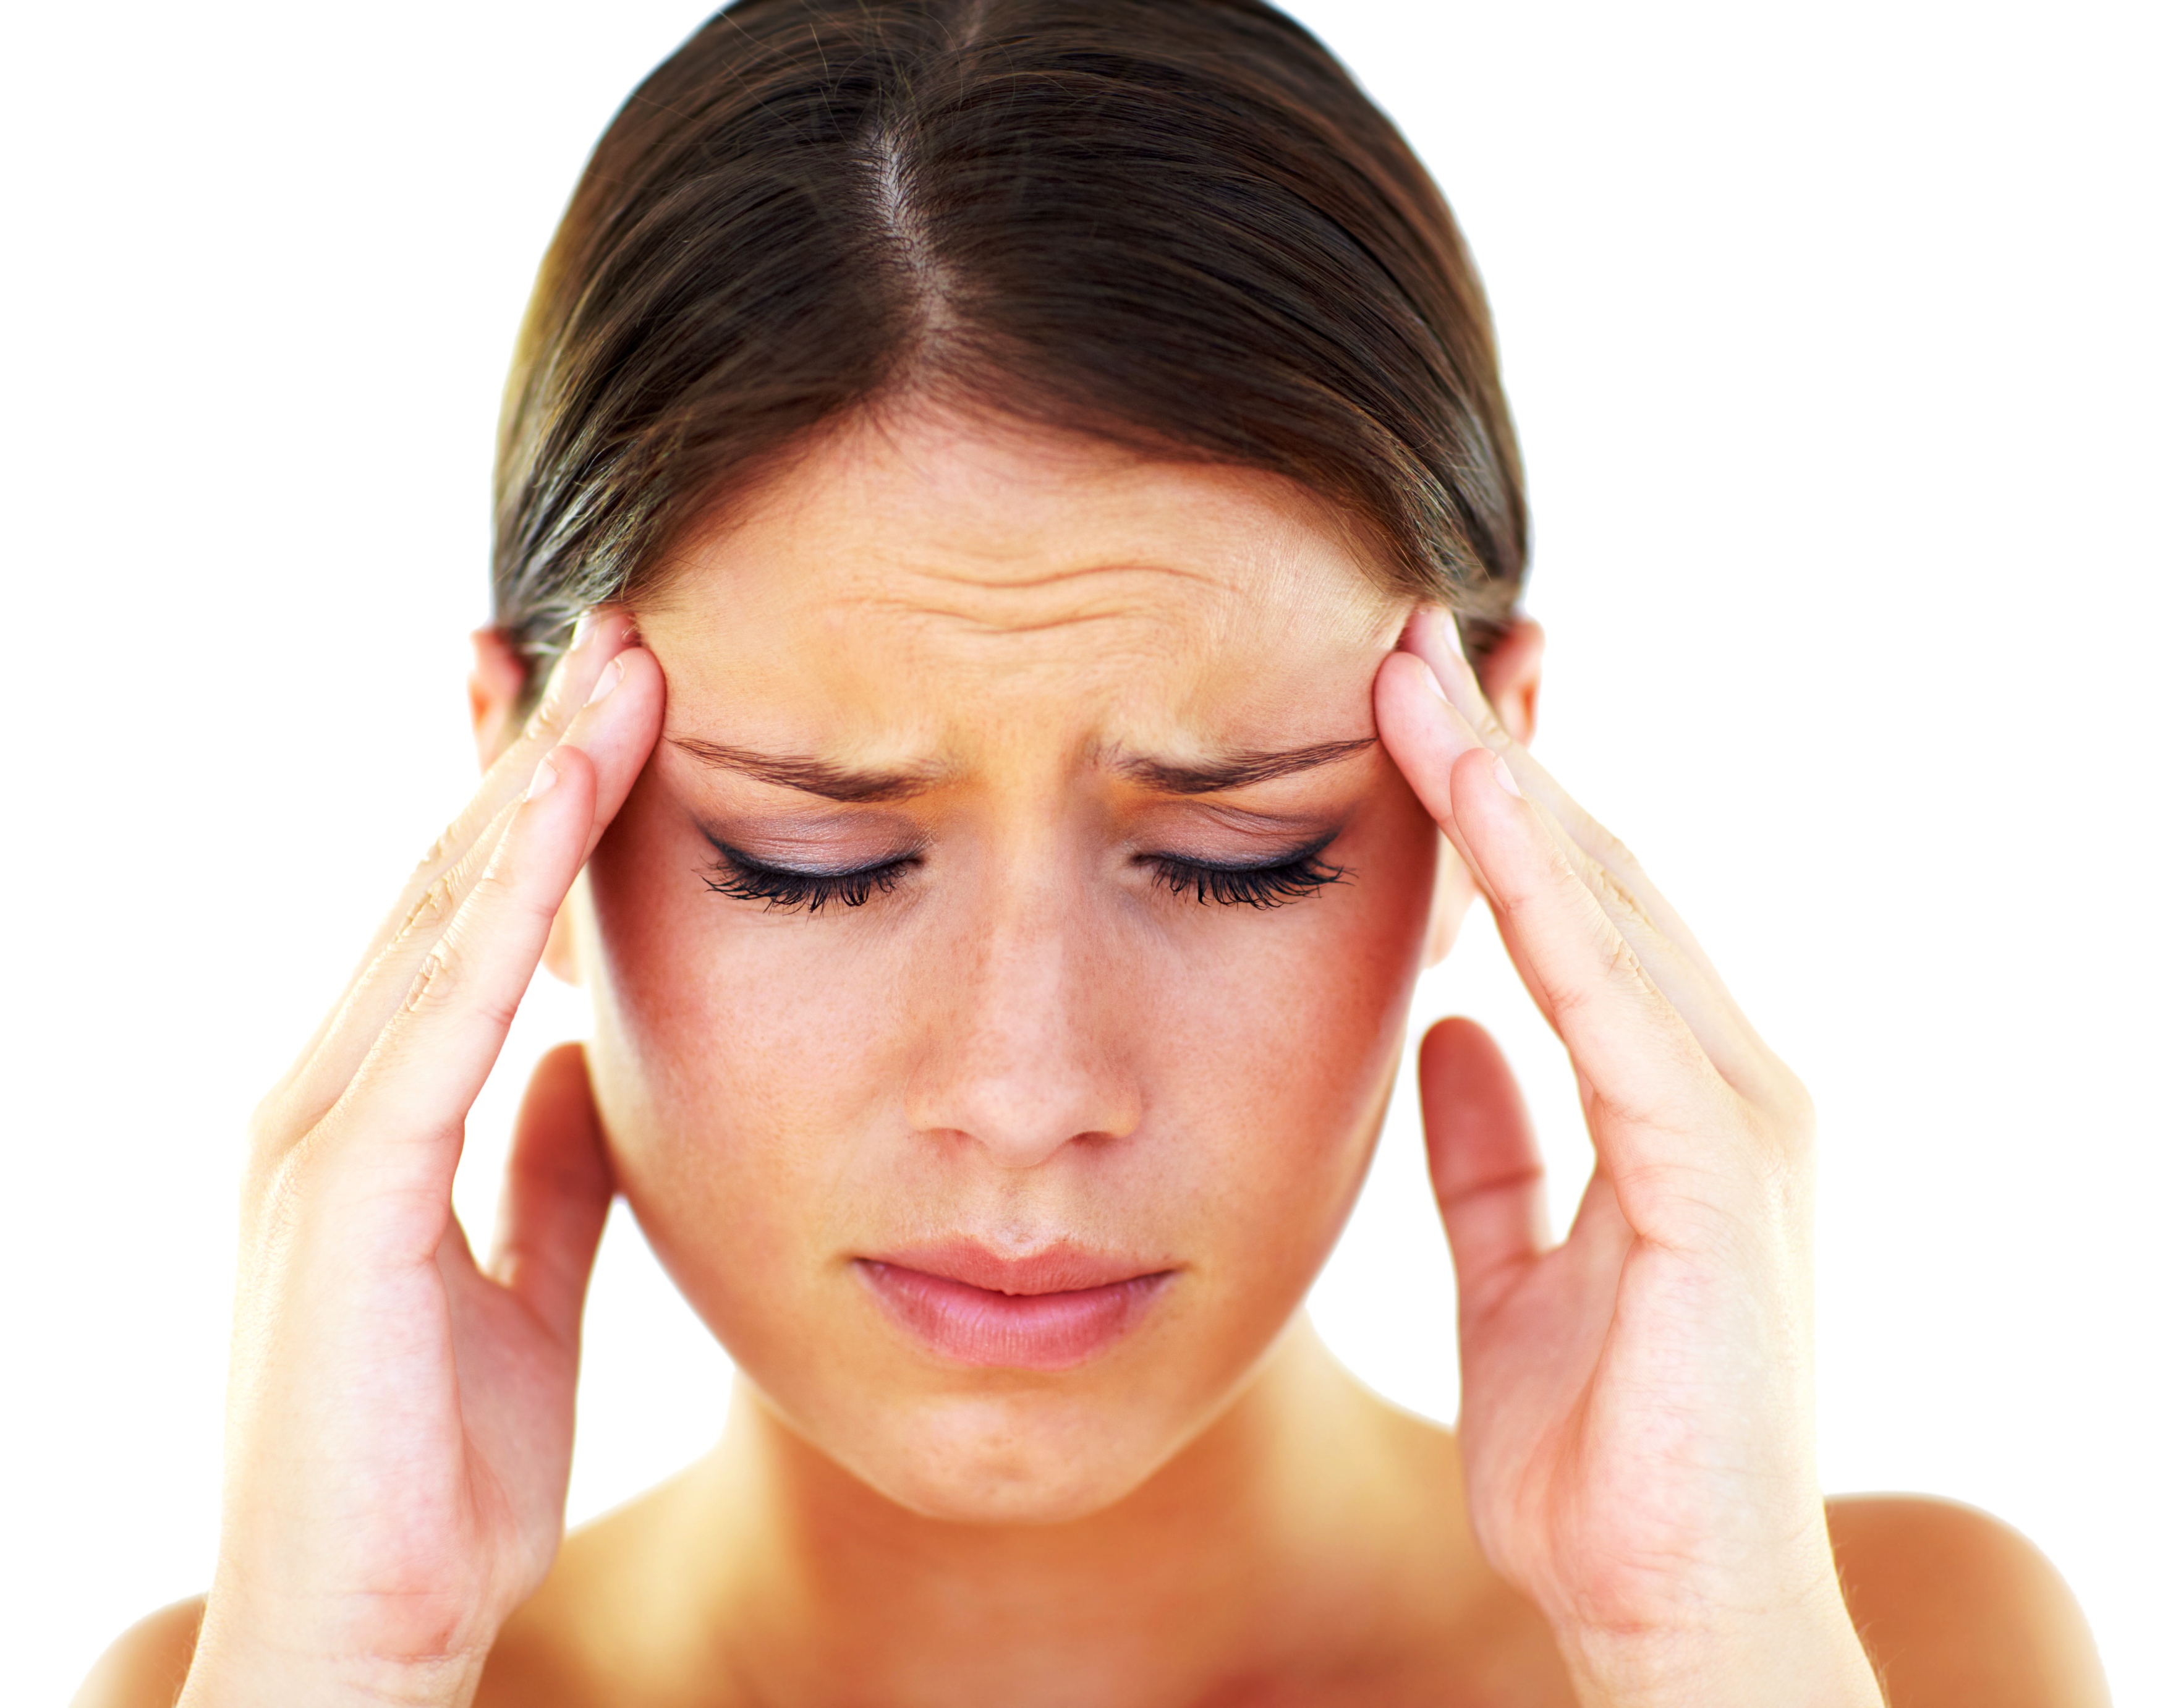 Did you know that an osteopath can help you with your headaches and migraines?